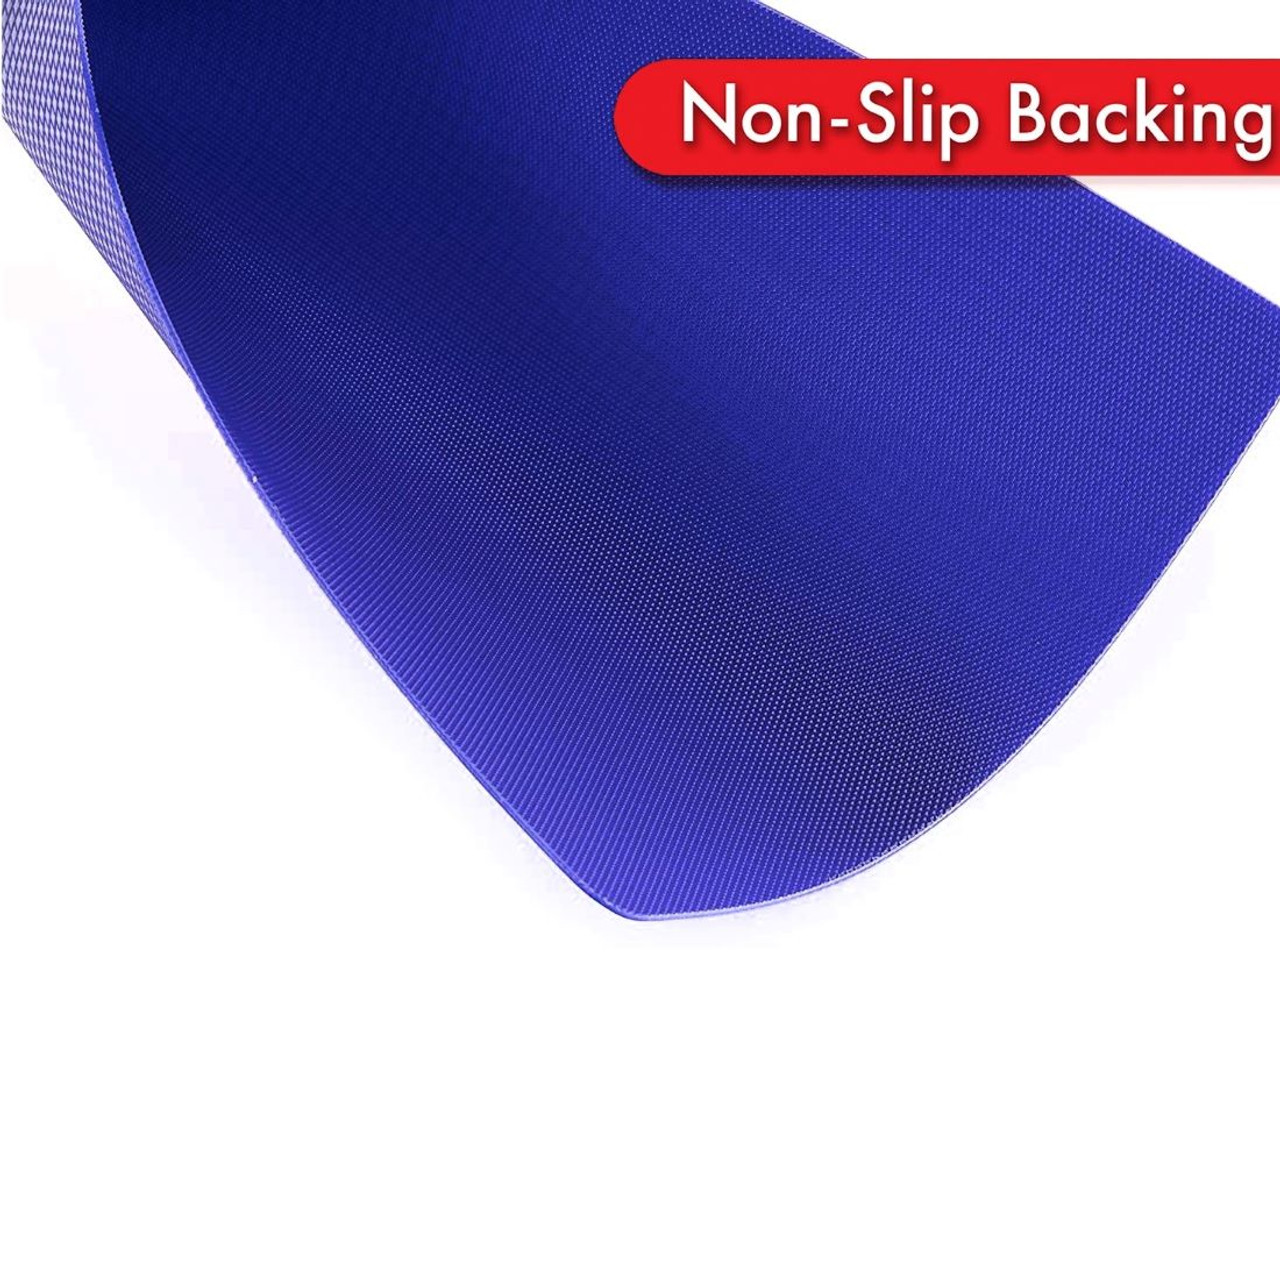 A non-slip backing grips tight to counter surfaces for safety!